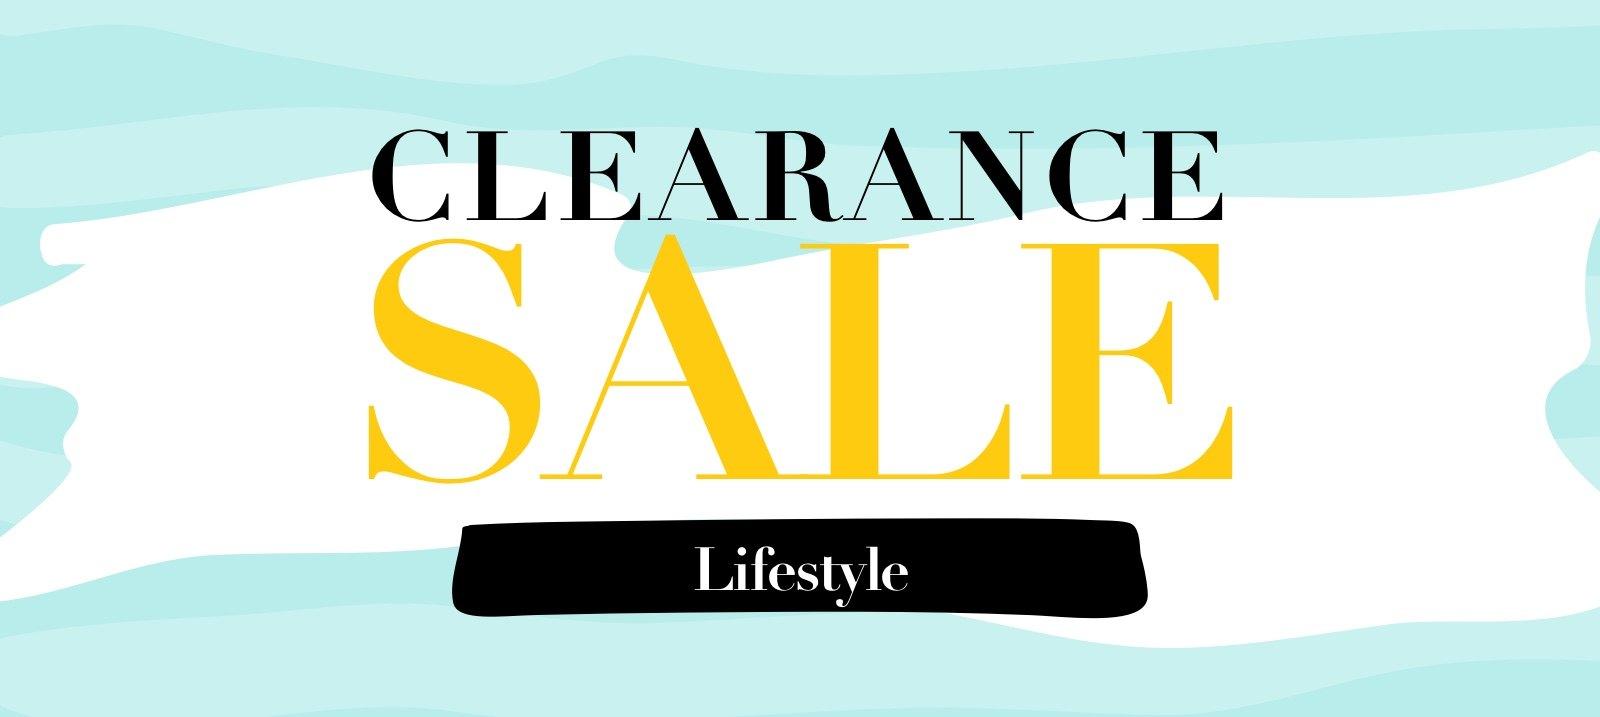 Clearance sale：Lifestyle